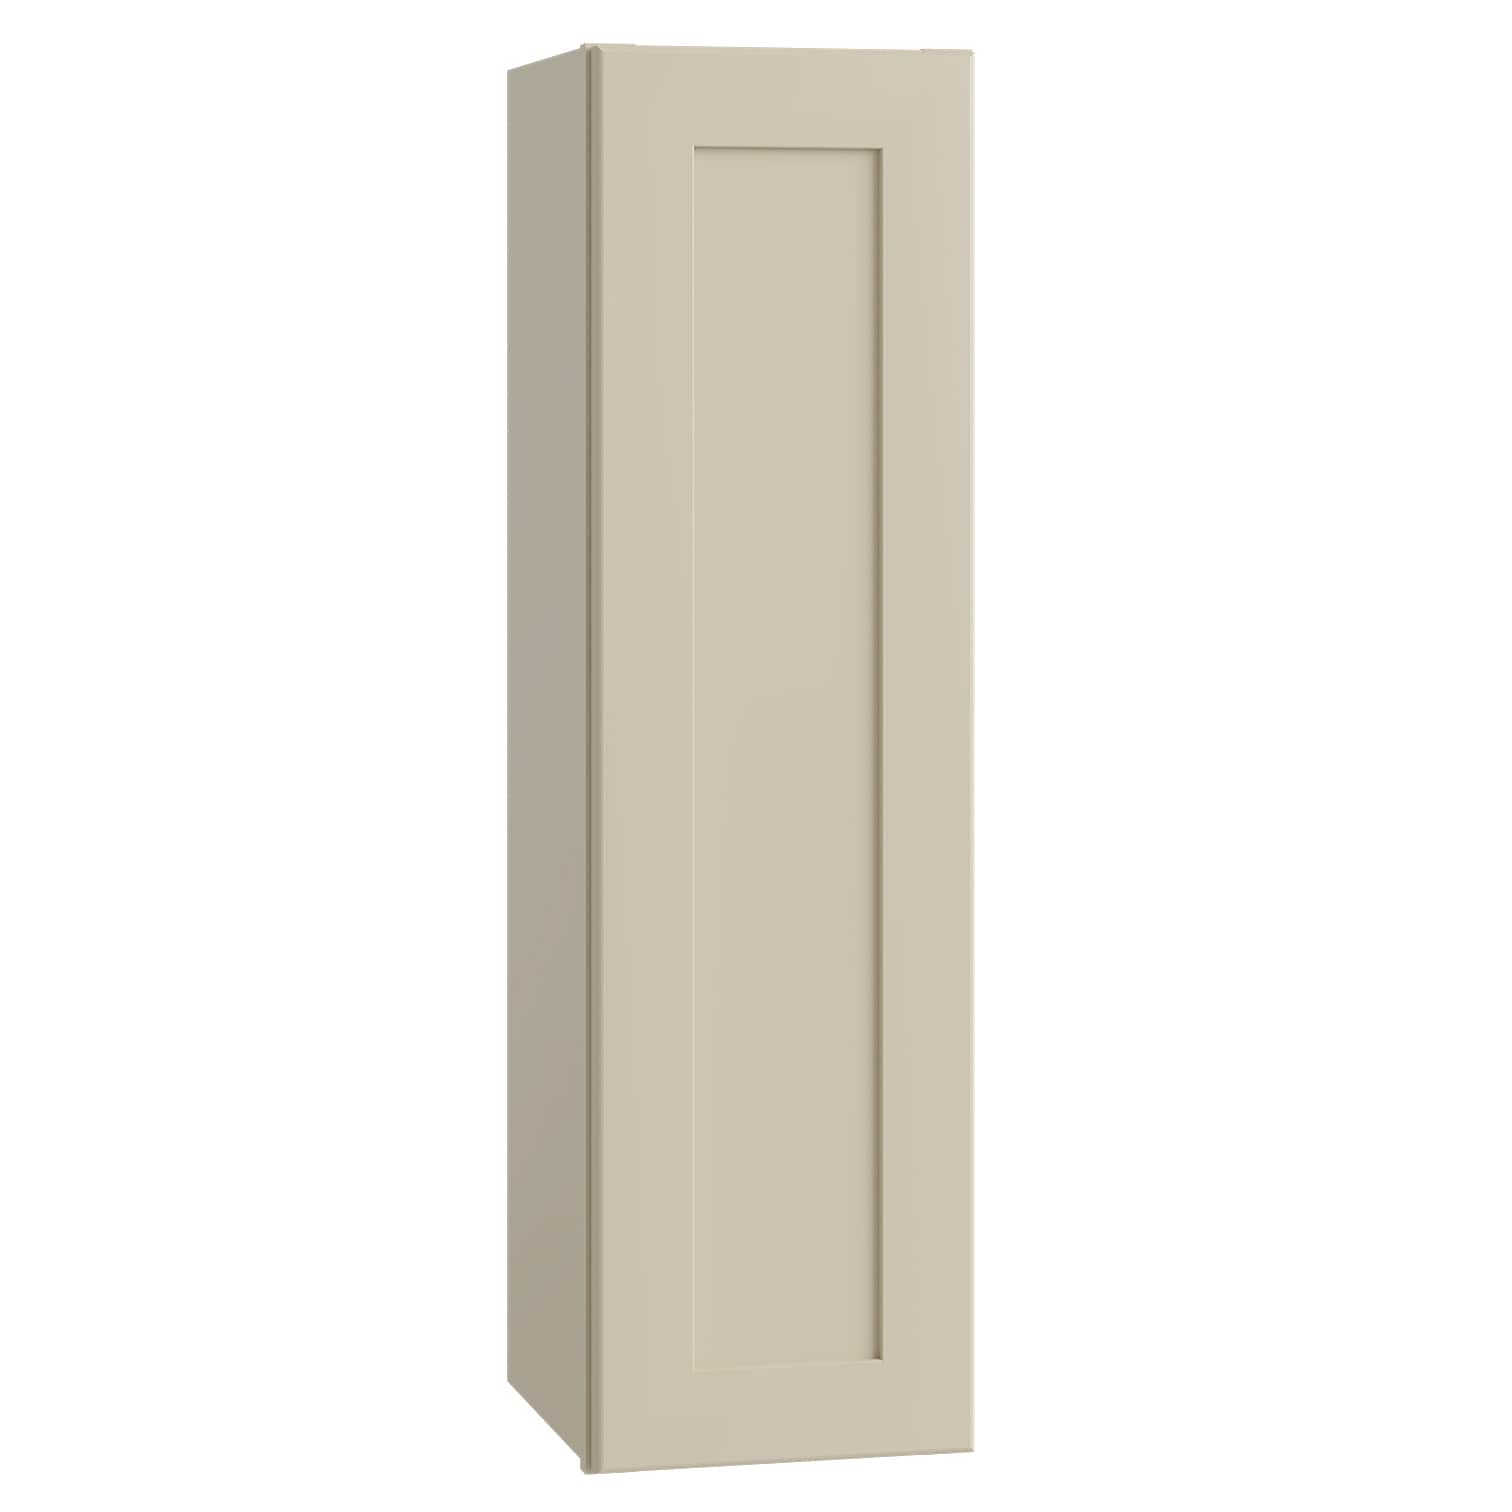 Luxxe Cabinetry 9-in W x 36-in H x 12-in D Norfolk Blended Cream Painted Door Wall Fully Assembled Semi-custom Cabinet in Off-White | W0936L-NBC